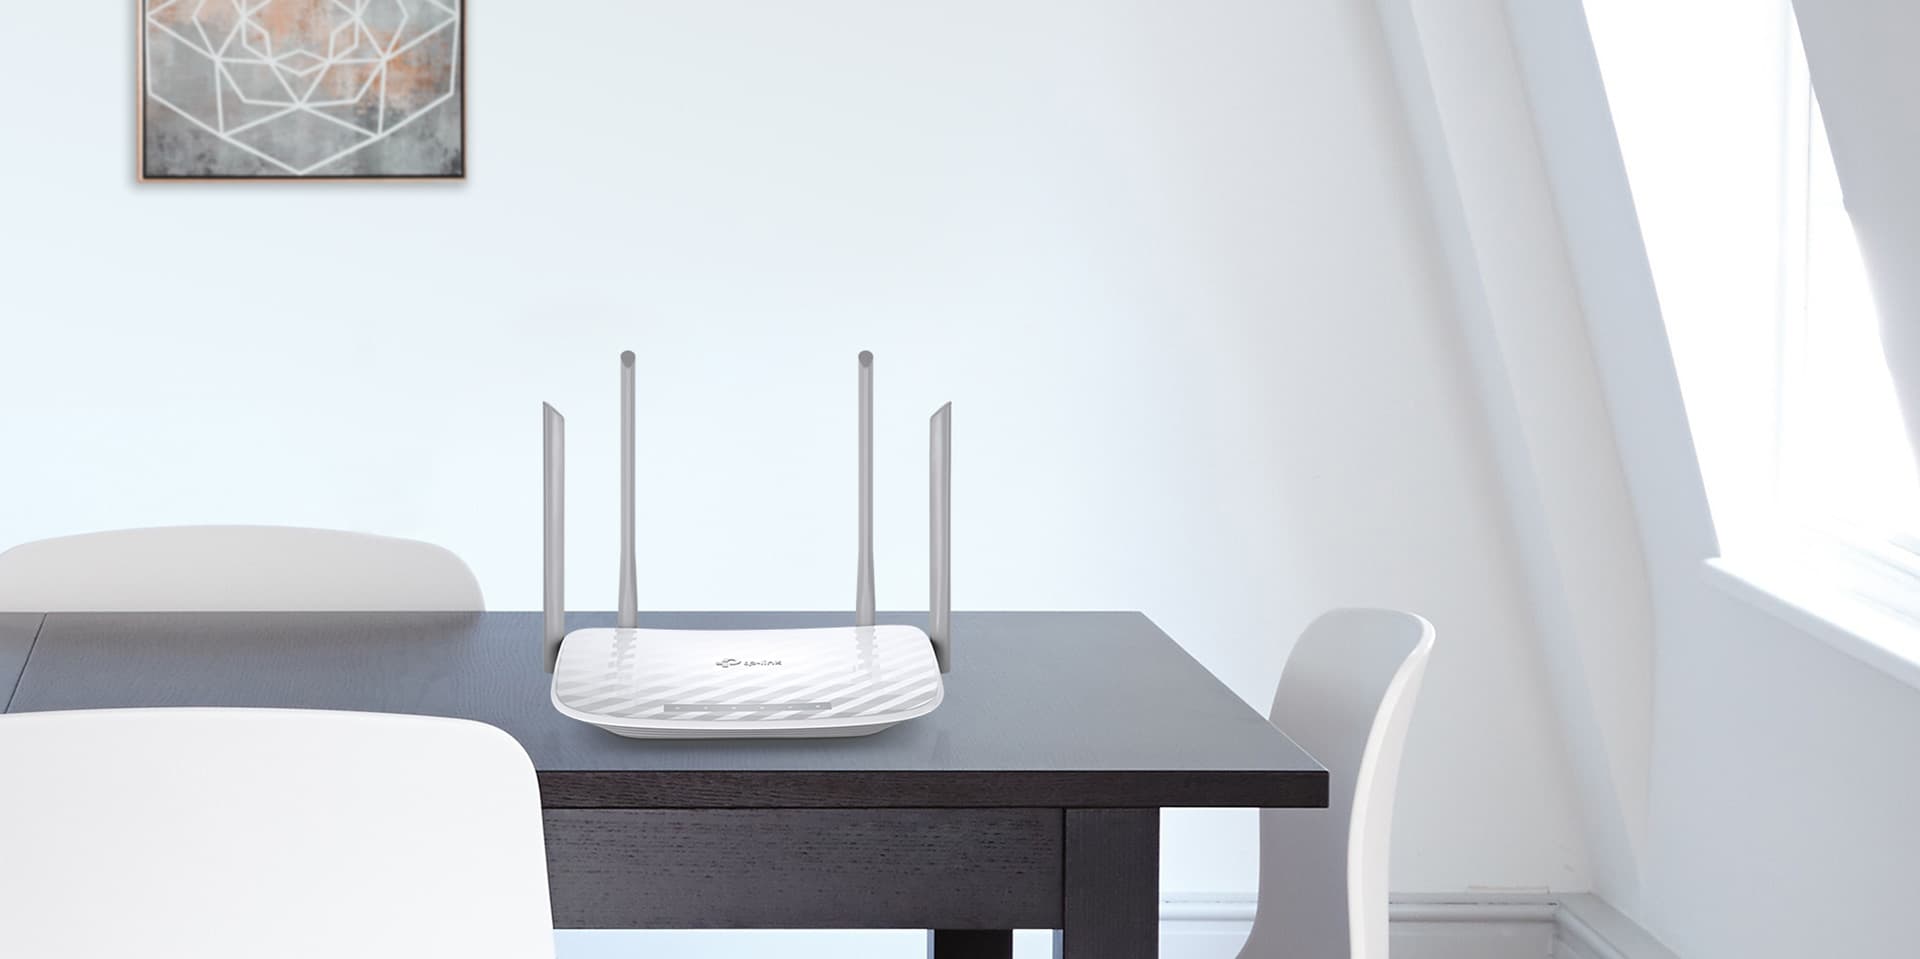 TP-LINK Archer C50 on a tabletop in a modern home setting